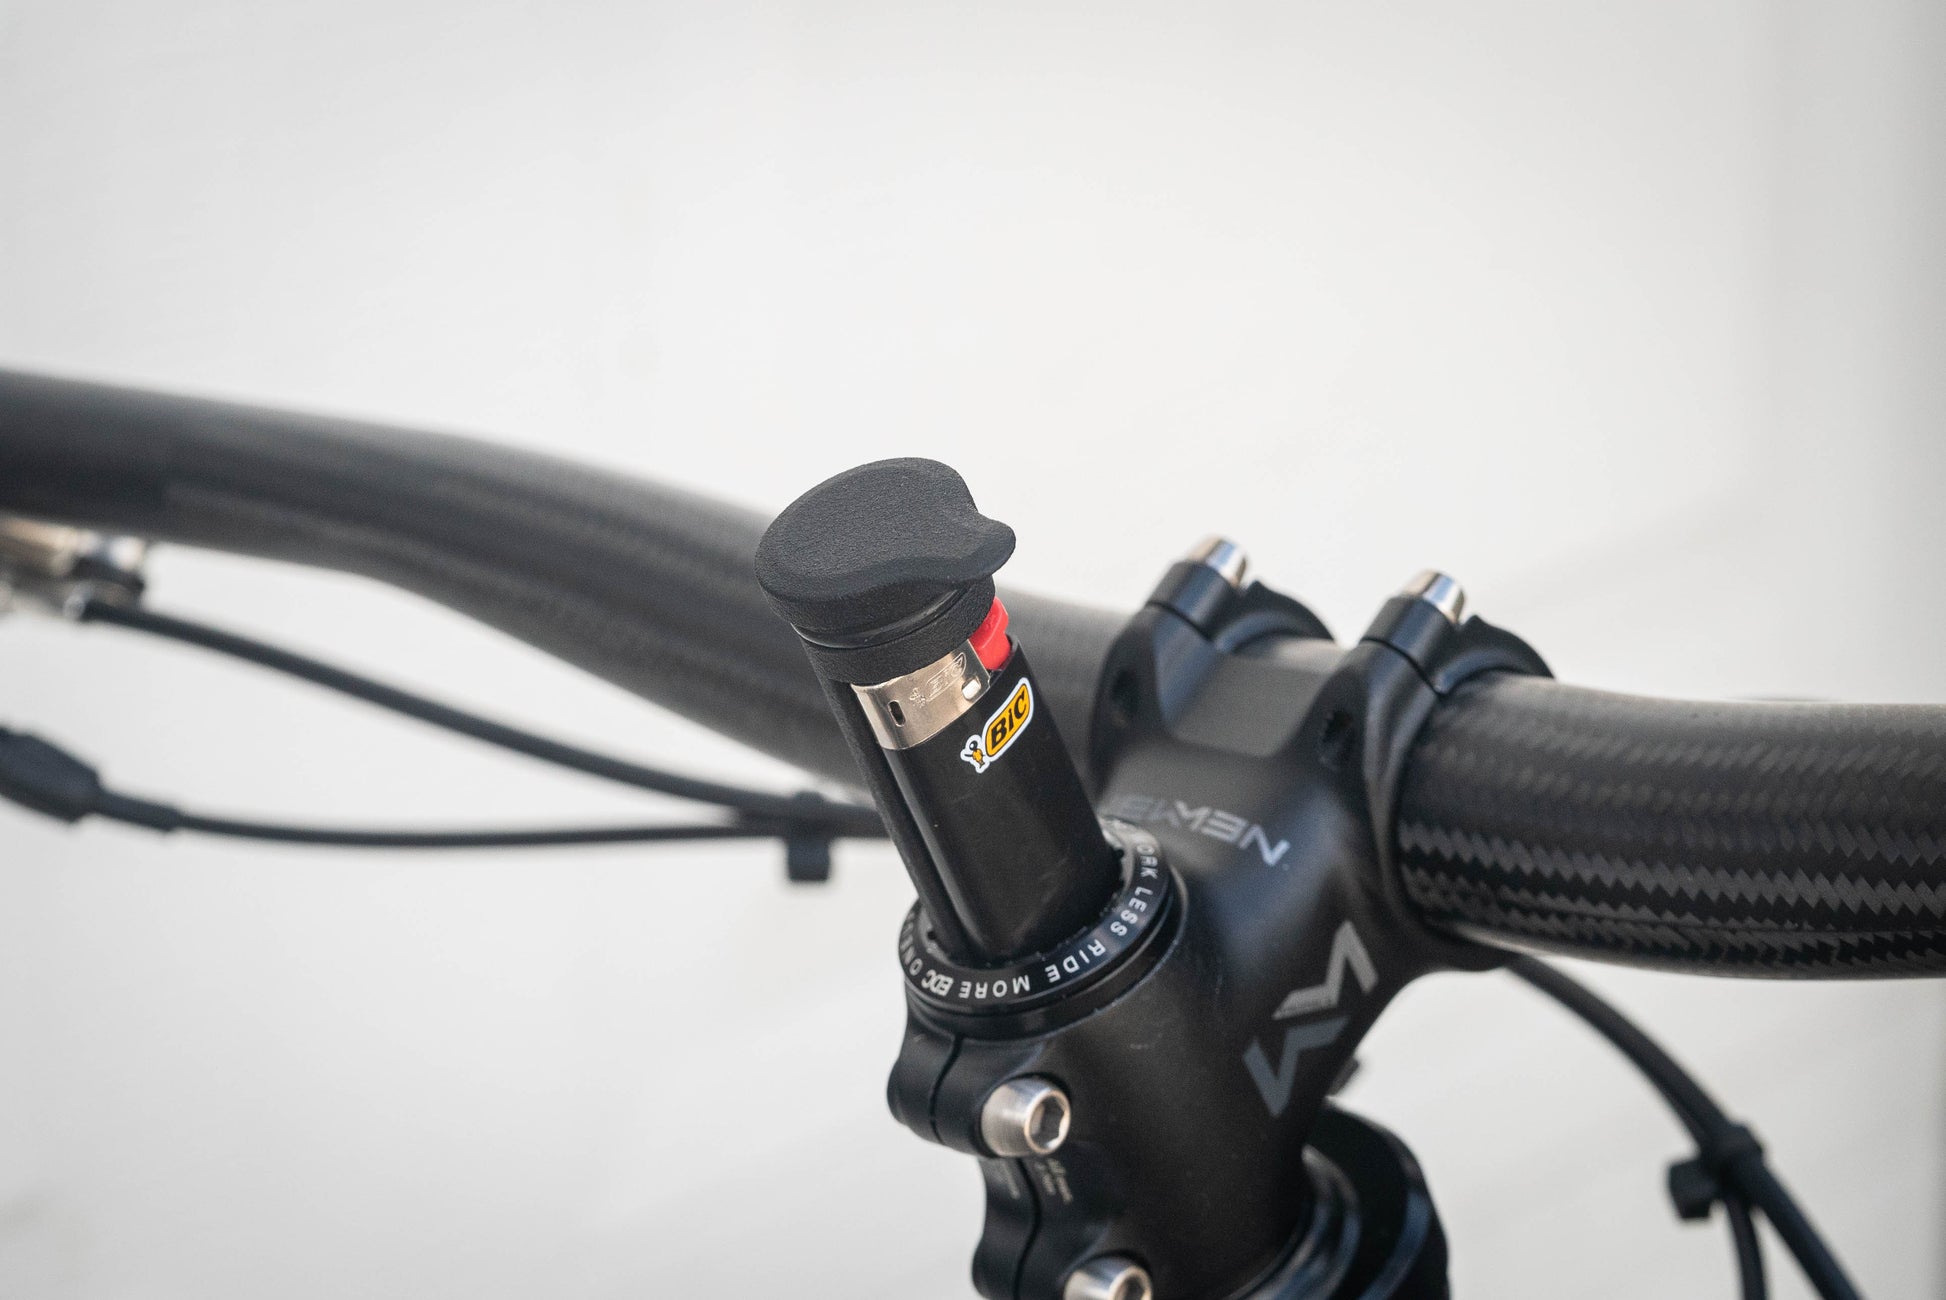 Image: The Climb Switch High Performance System, a discreet and practical bike accessory, discreetly stores a custom machined one-hitter, a Mini BIC lighter, and a small amount of material inside your bike's steerer tube. Designed to seamlessly integrate with the OneUp EDC top cap system, it is crafted in BC, Canada using 3D printed MJF nylon and 6061 aluminum materials, ensuring a lightweight, durable, and inconspicuous addition to your bike. angle closeup.